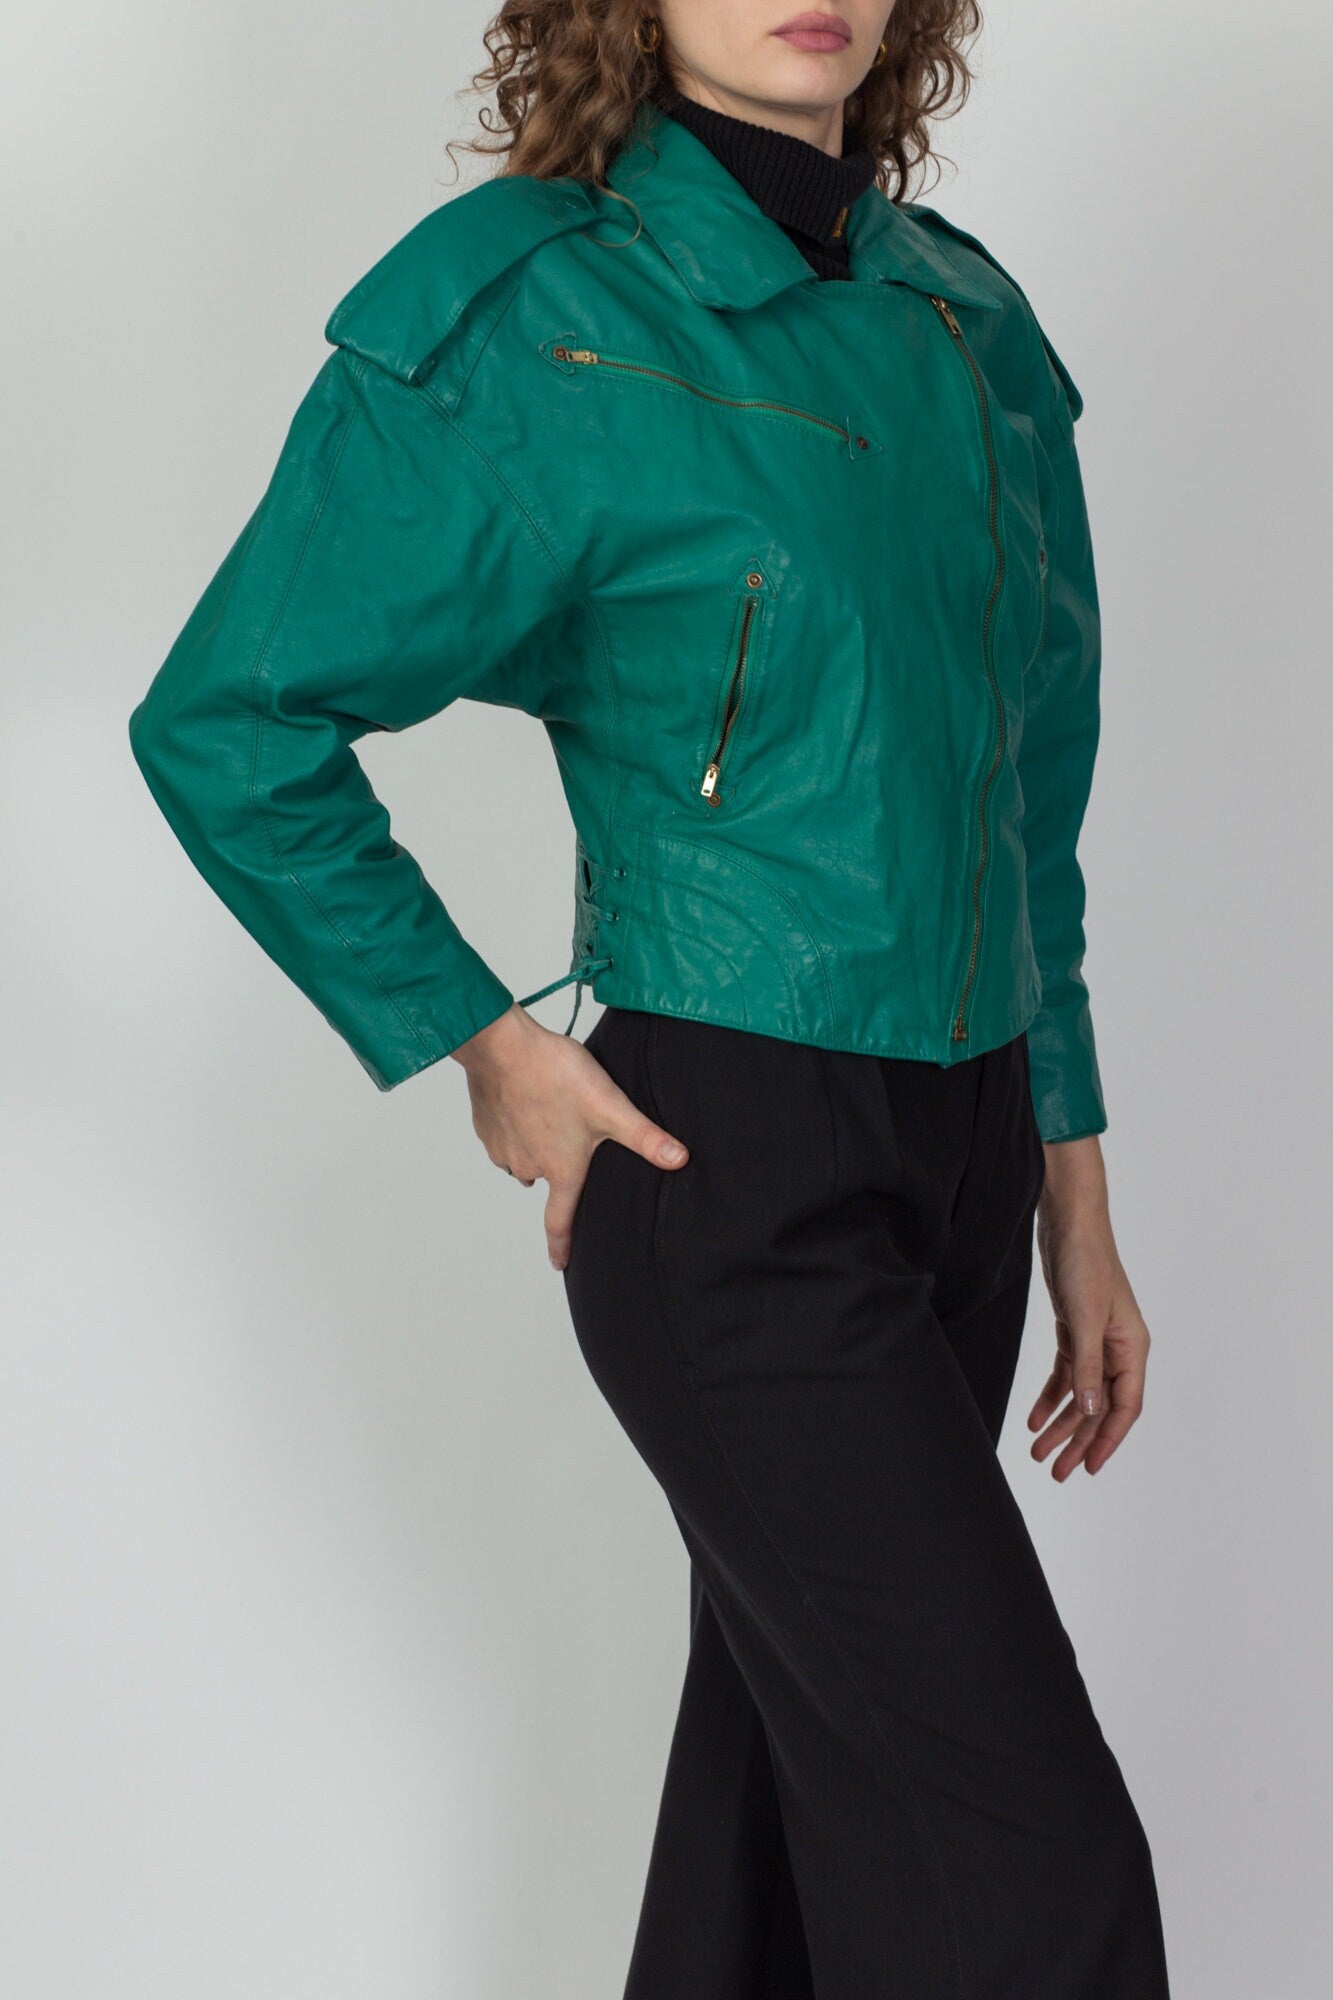 Vintage 80s Teal Green Leather Crop Jacket - Small 